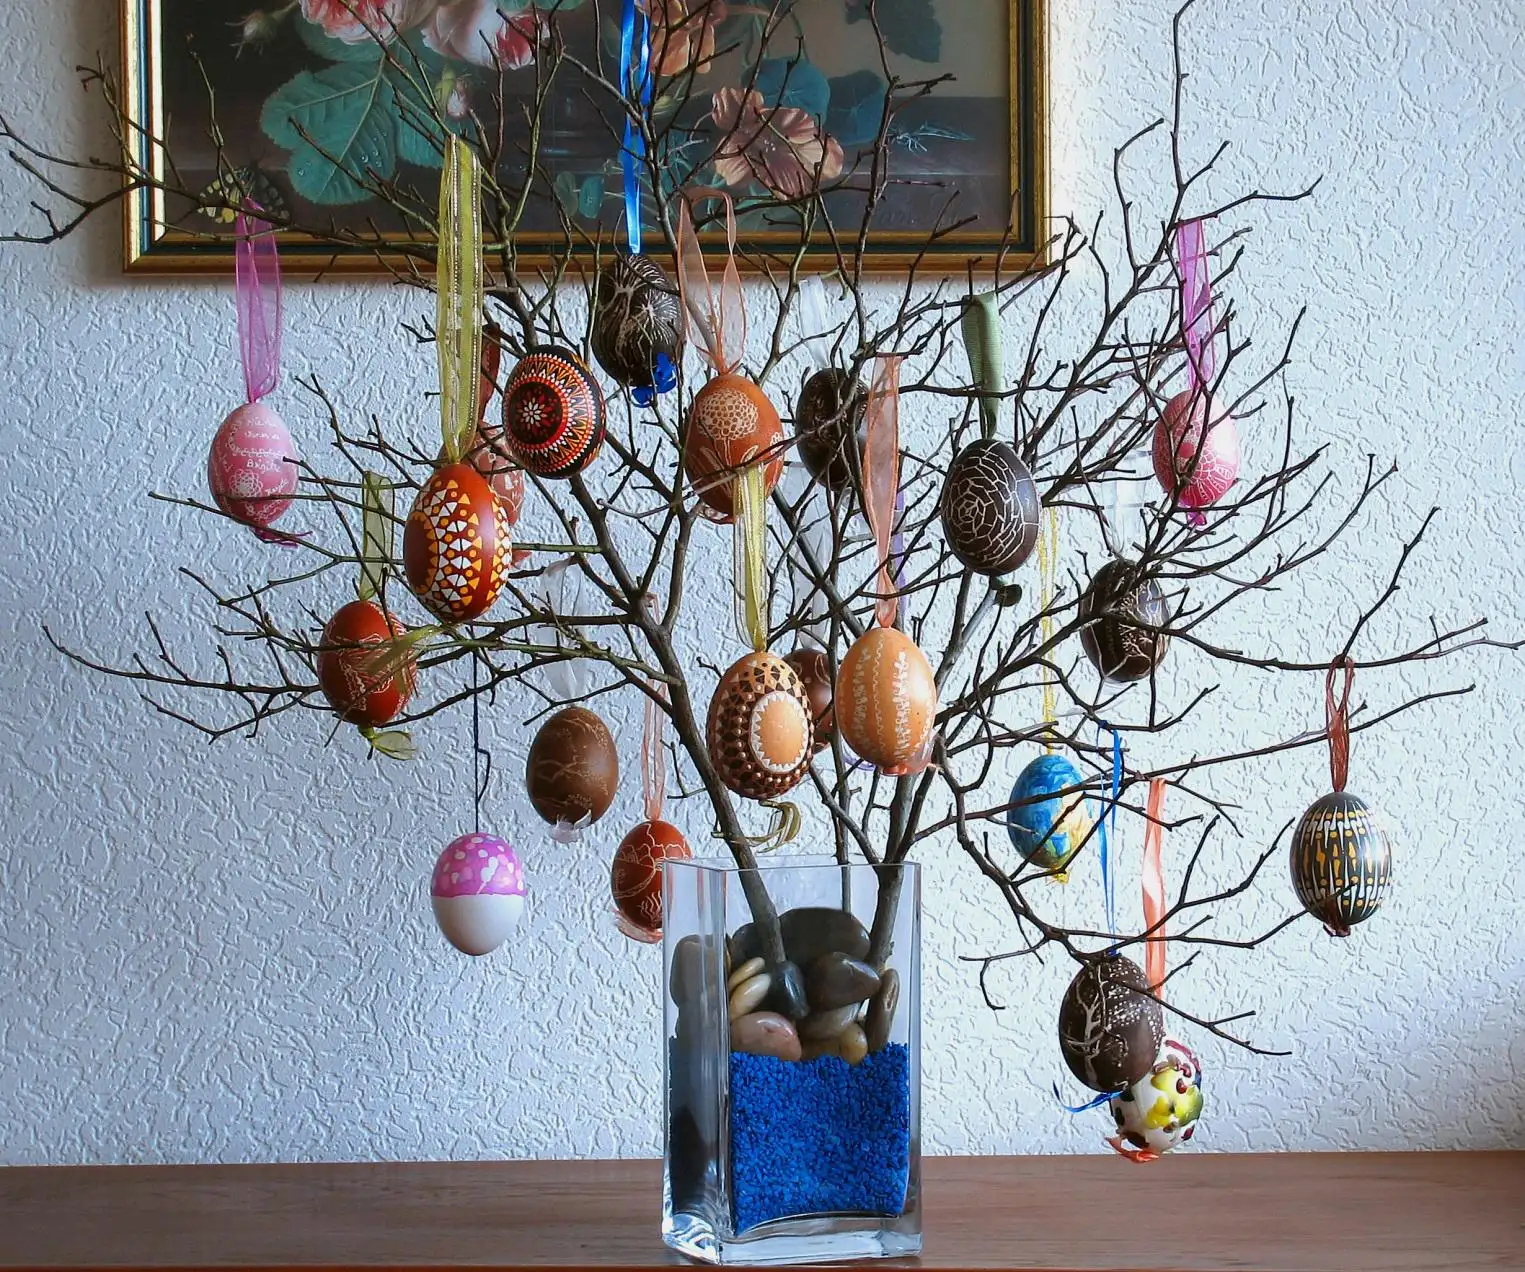 Christian decorations associated with Easter